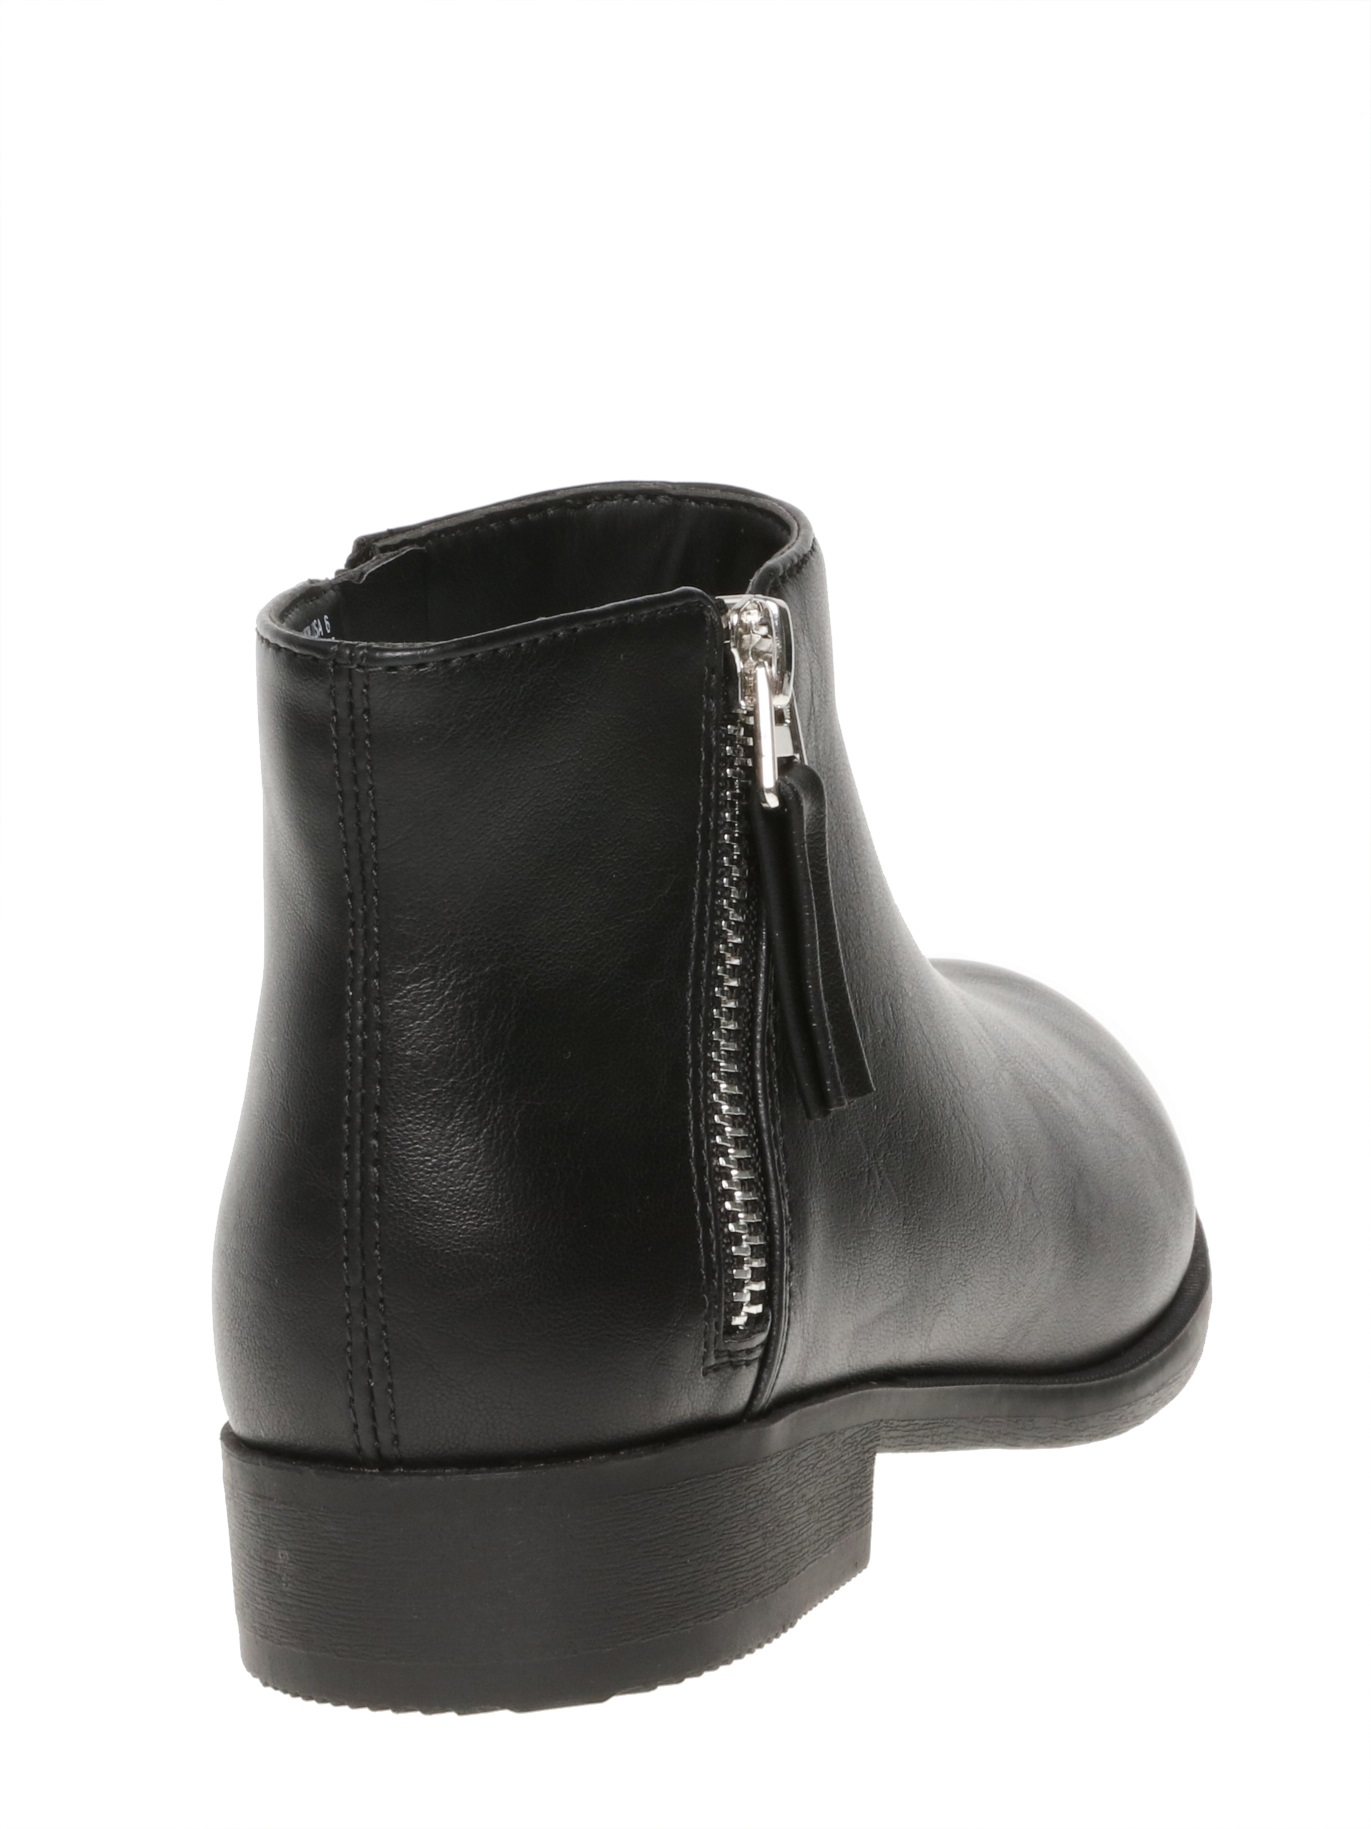 Women's Time and Tru Two Zip Bootie - image 5 of 6